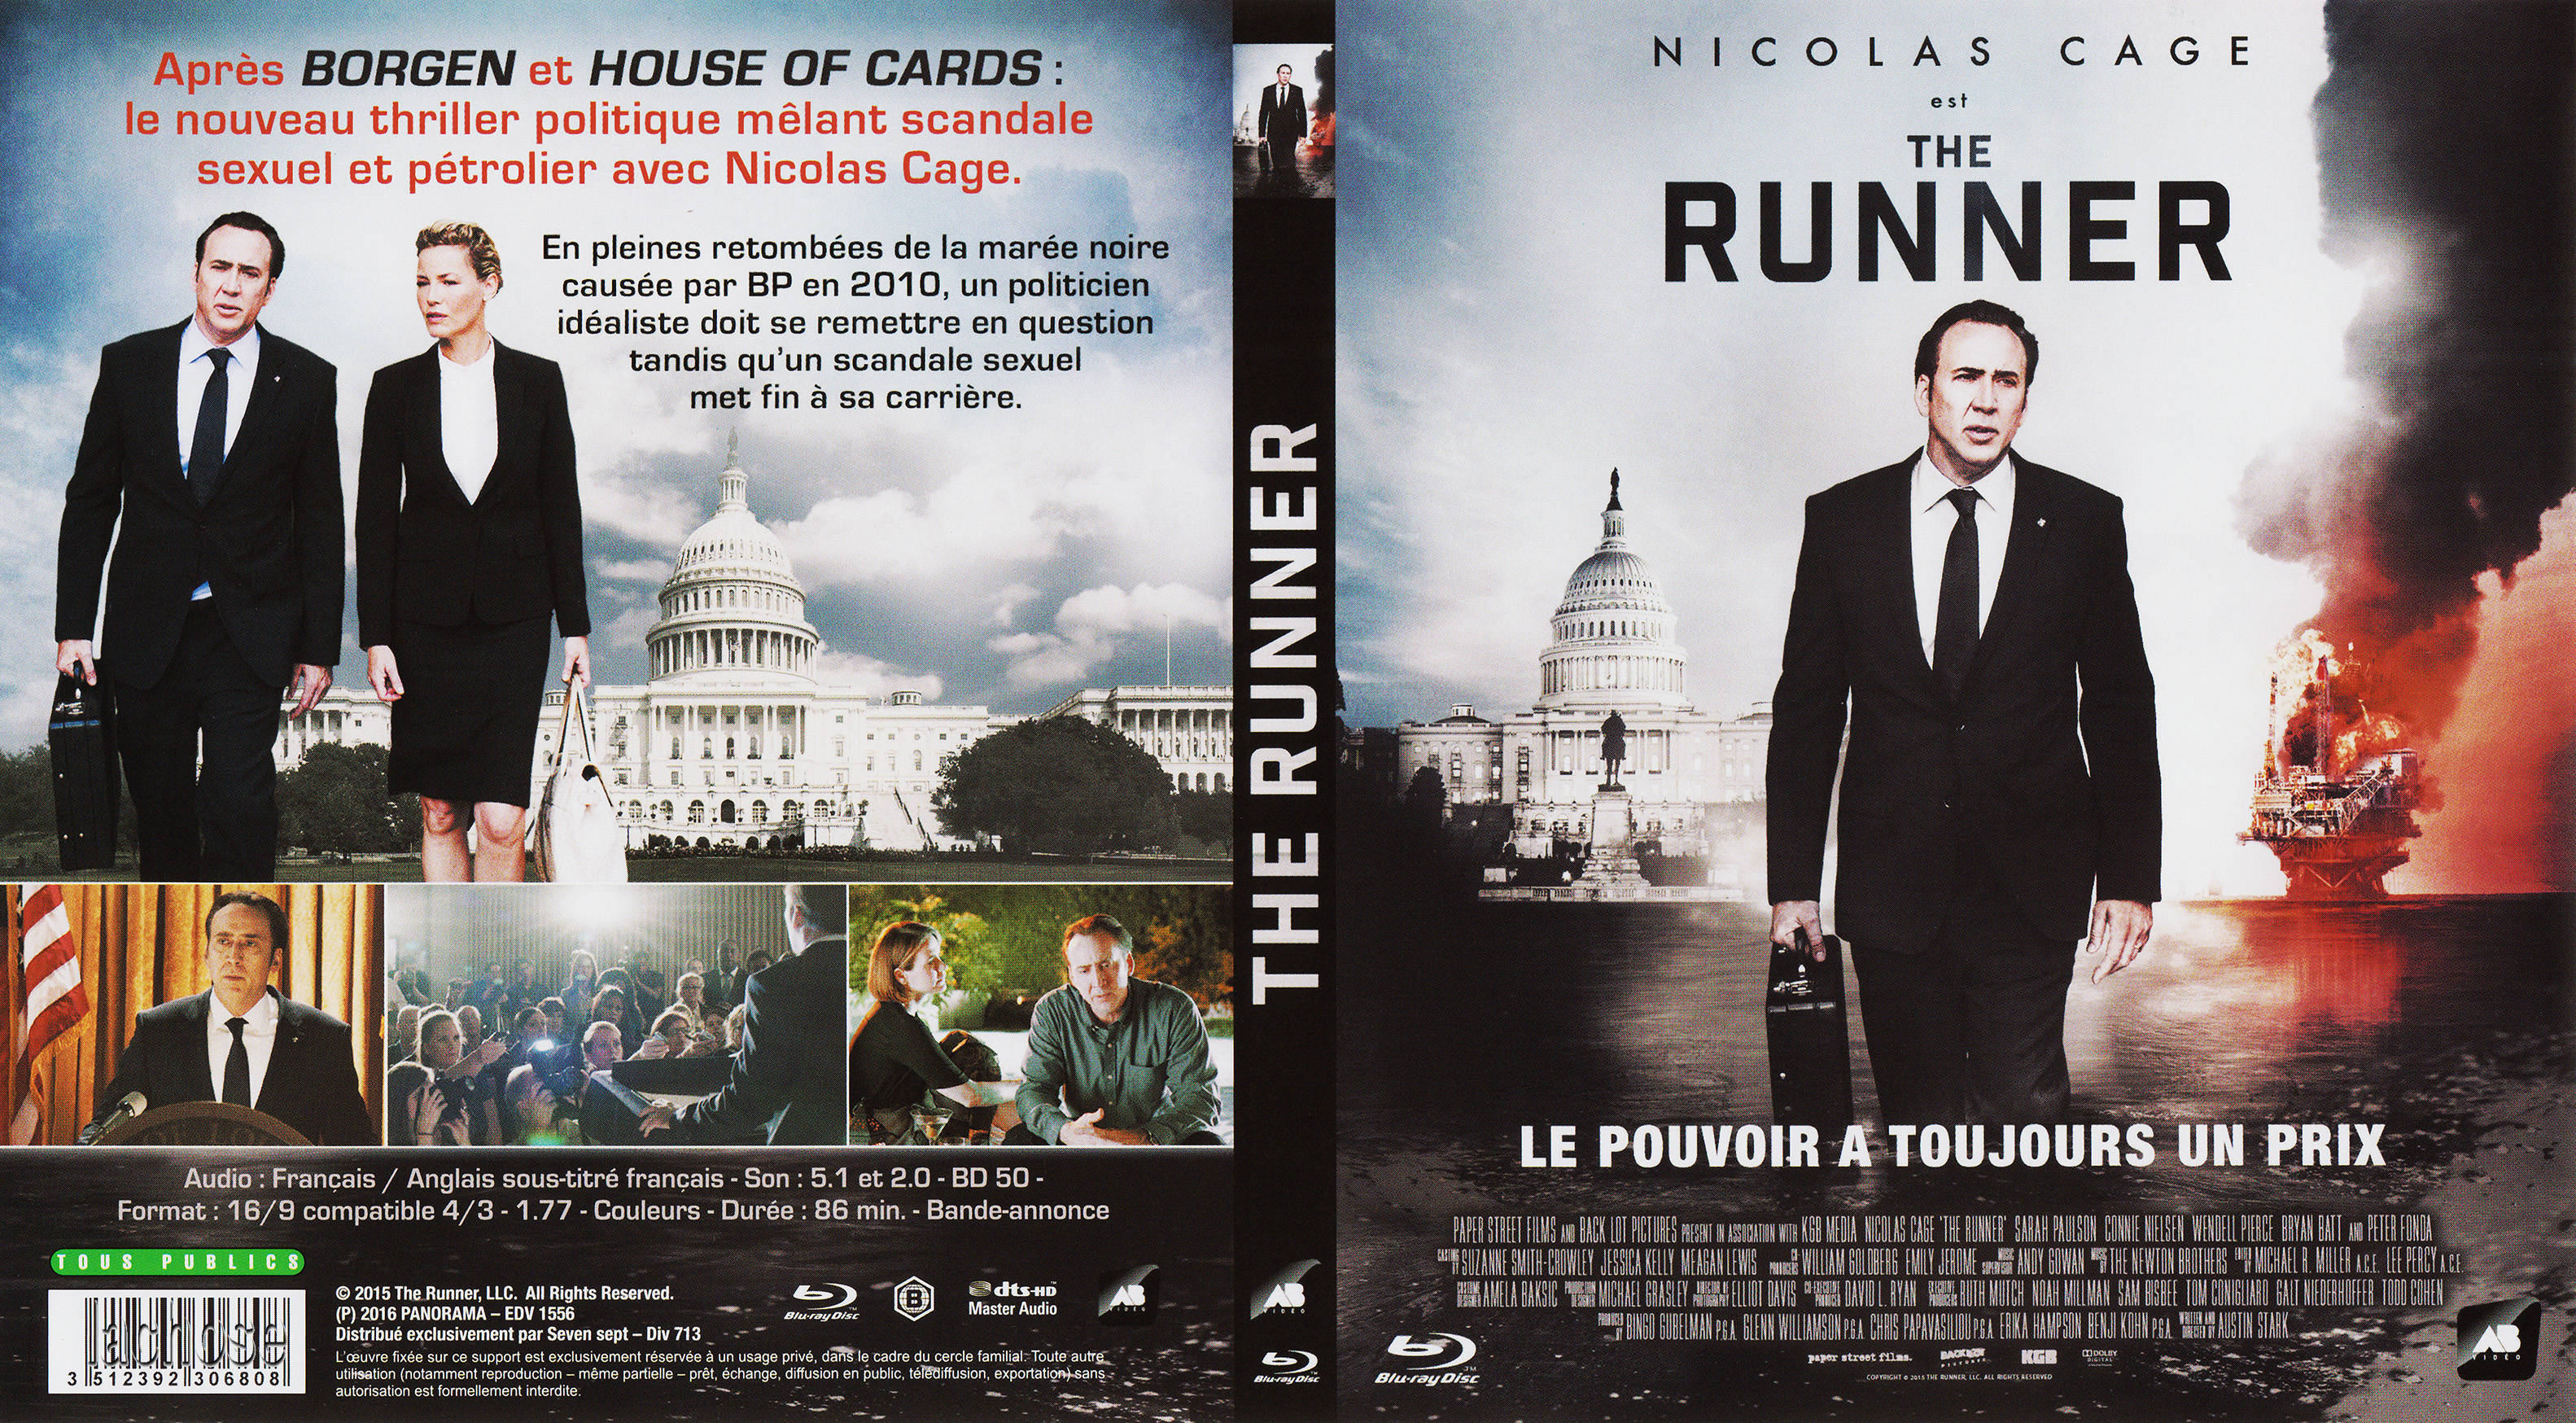 Jaquette DVD The runner (BLU-RAY)